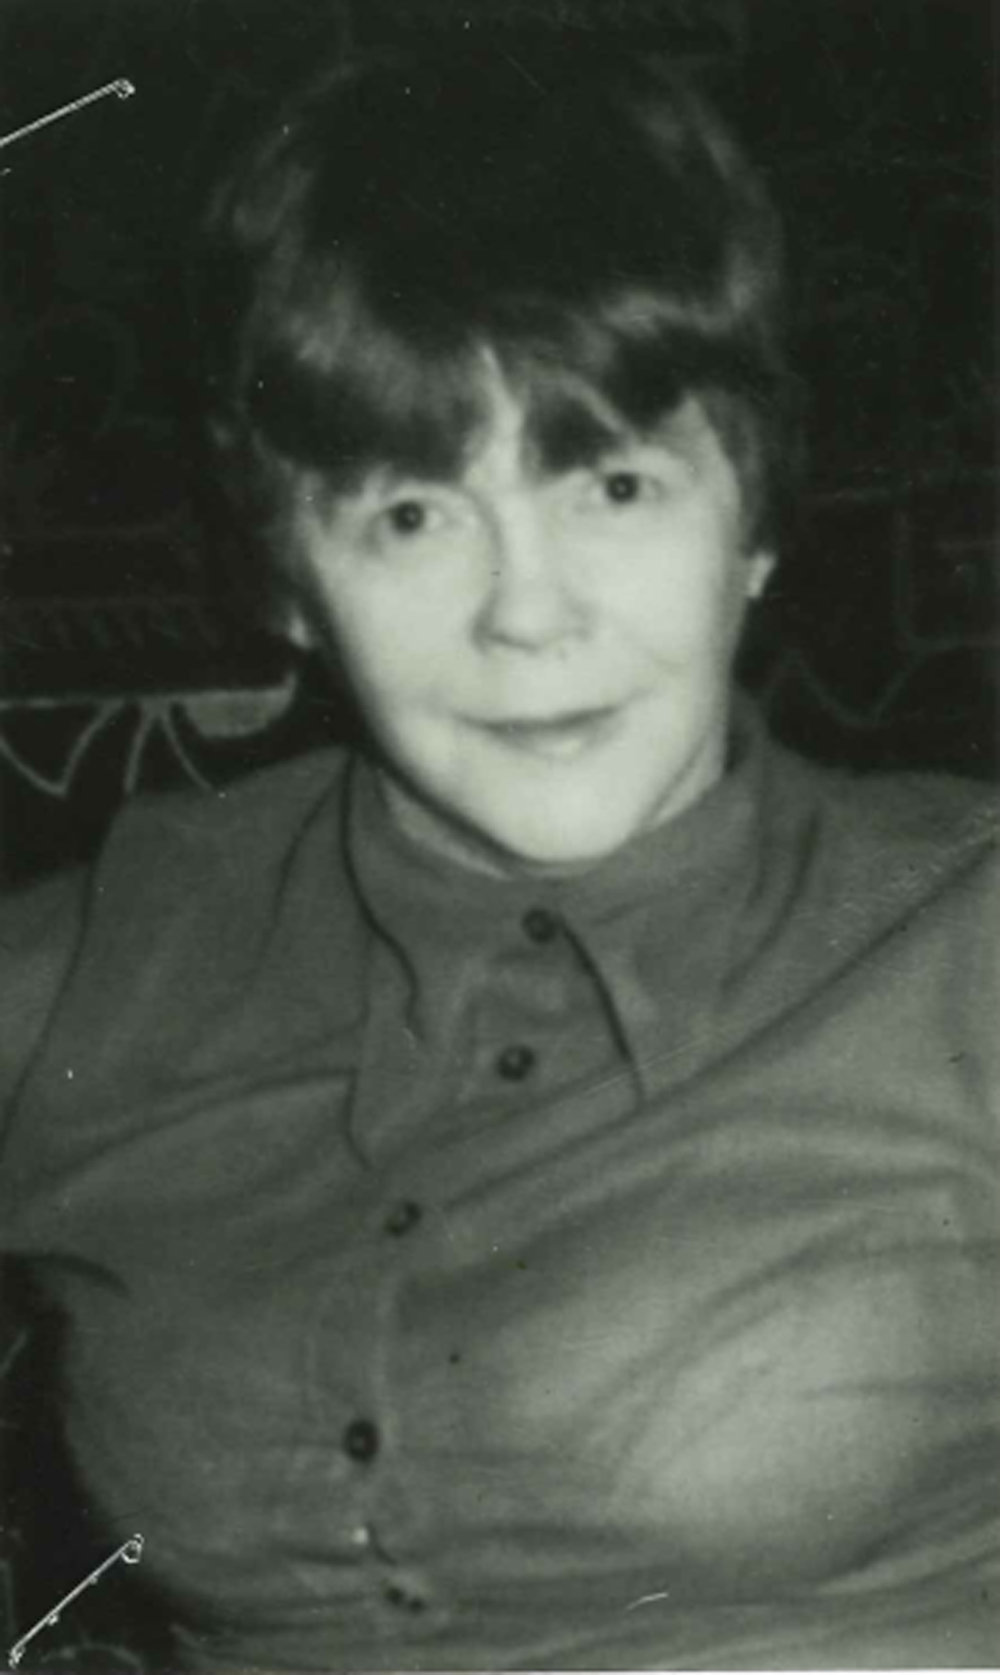 Mary McLaughlin was murdered in her own home